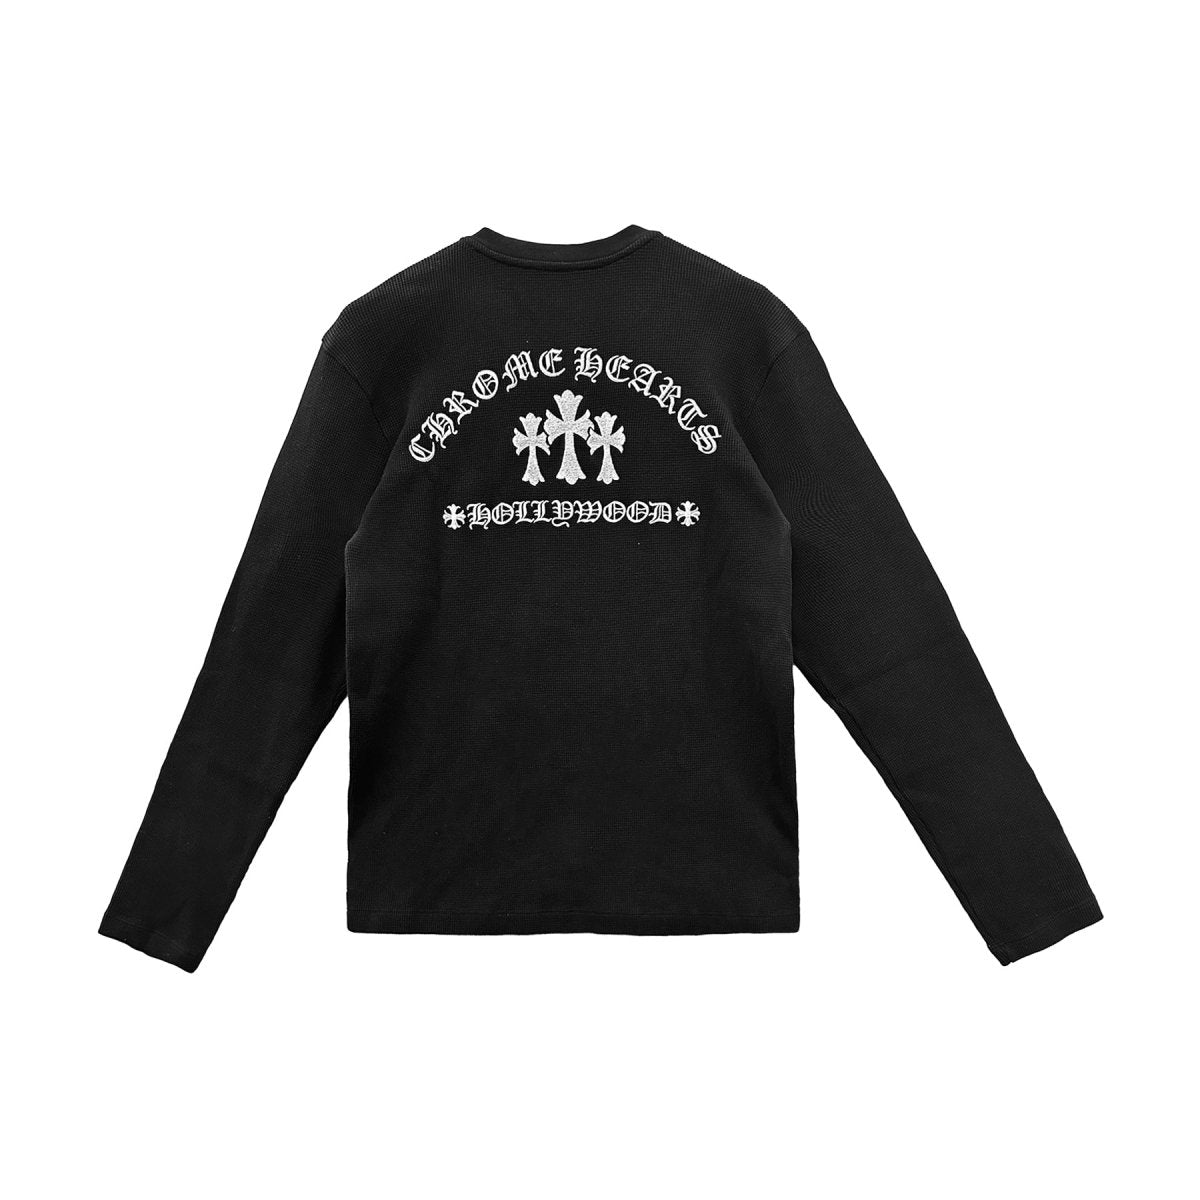 Chrome Hearts Black Henley Embroidered Thermal Shirt - SHENGLI ROAD MARKET